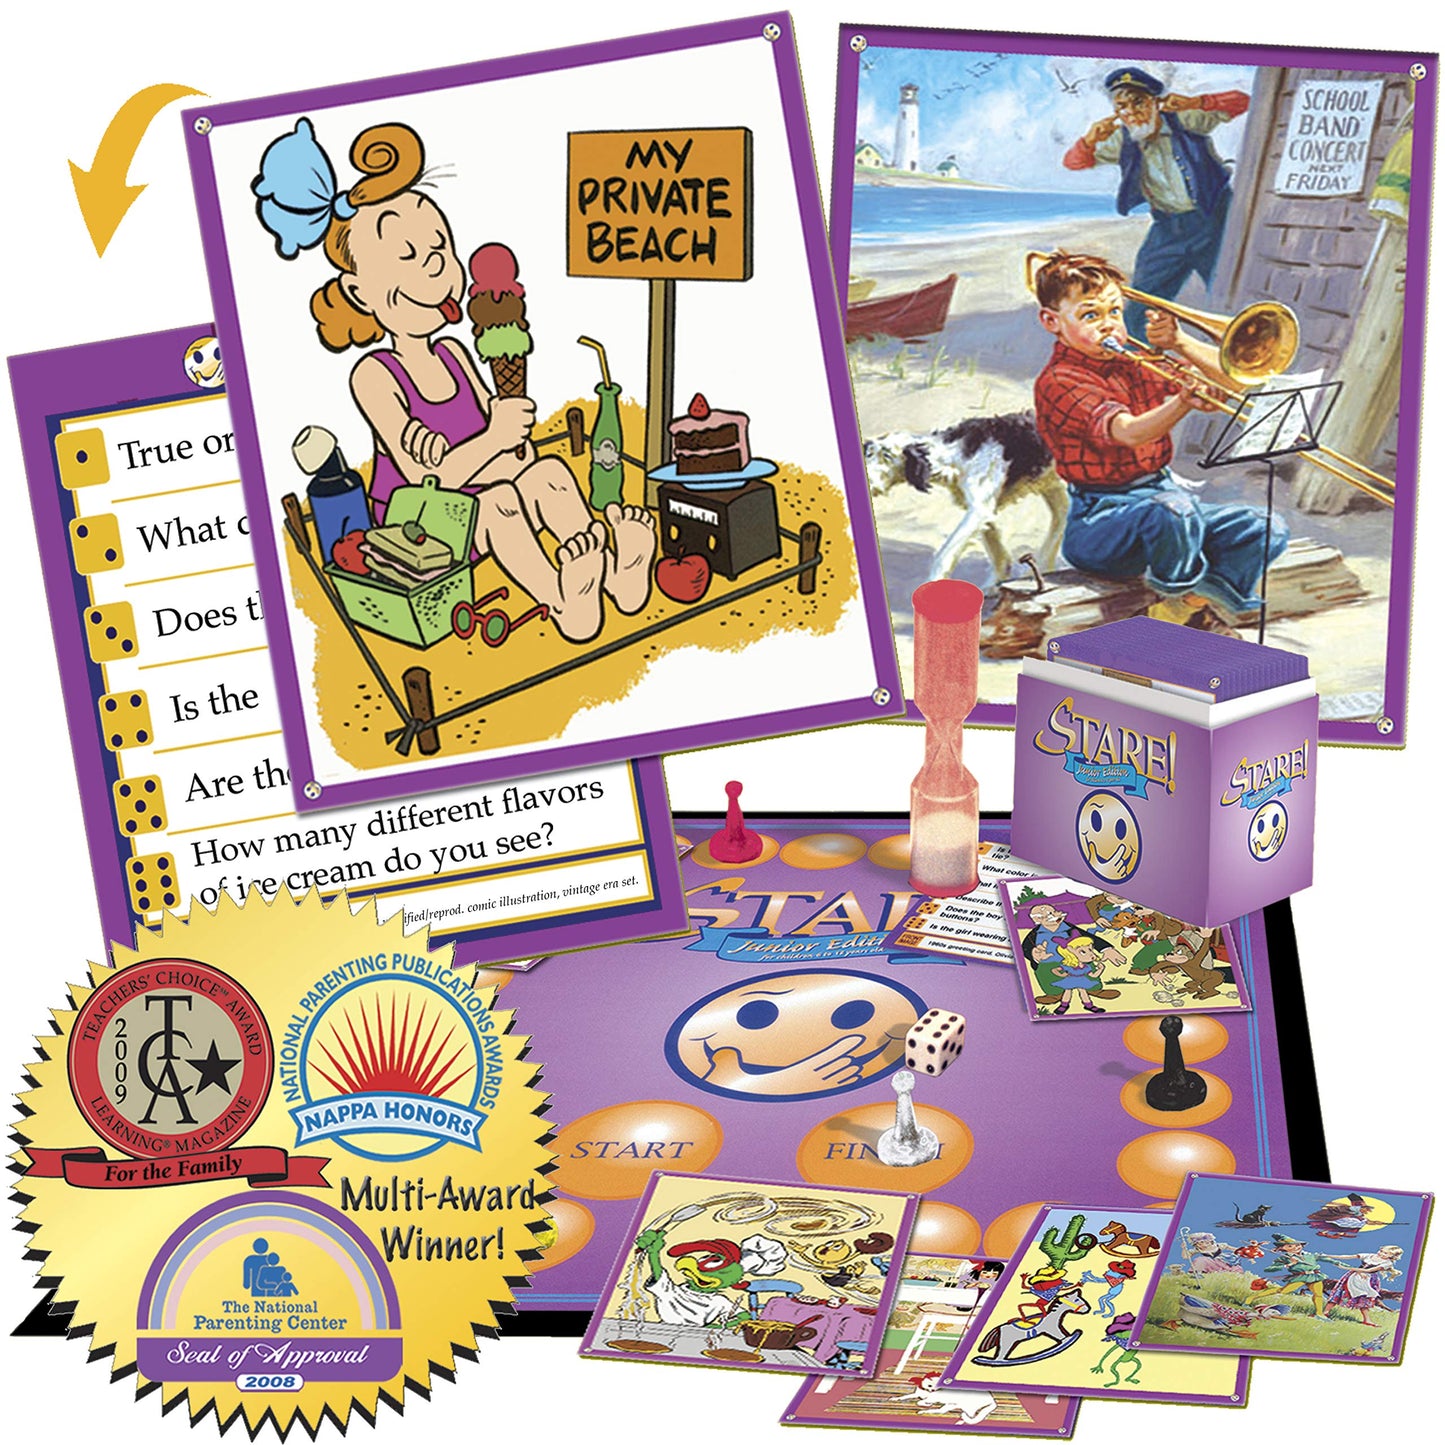 Stare Junior Board Game for Kids, A Game Where Players Recall What They See. Fun Images Engage The Observational Skills of The Entire Family! Ages 6-12 with Special Rules for Parents